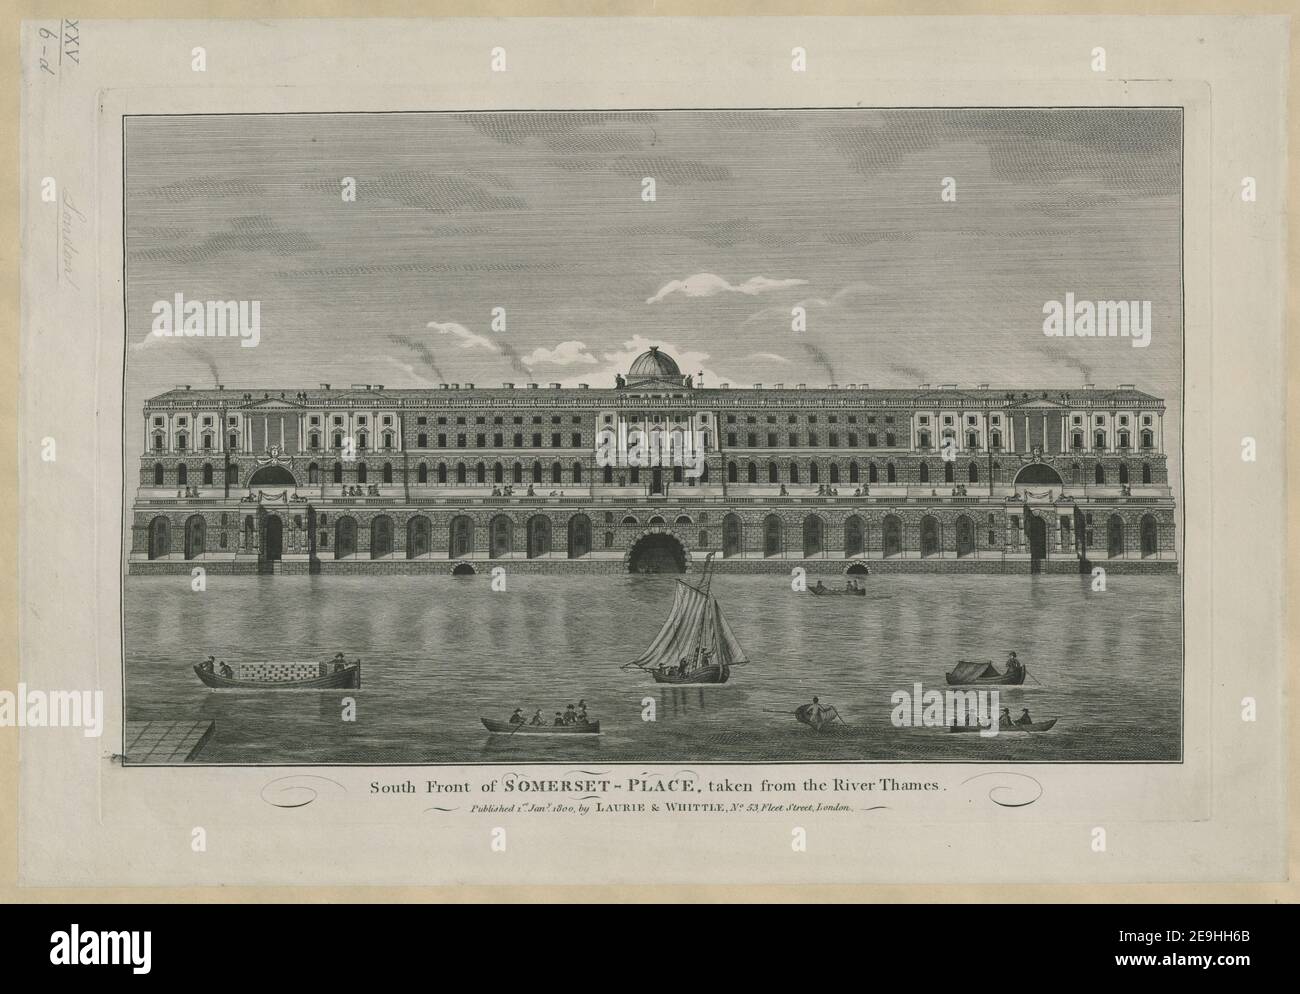 South Front of SOMERSET   PLACE, taken from the River Thames. Visual Material information:  Title: South Front of SOMERSET - PLACE, taken from the River Thames. 25.6.d. Place of publication: [London] Publisher: Published 1.st Jan.y 1800, by LAURIE , WHITTLE, No. 53 Fleet Street, London., Date of publication: [1800]  Item type: 1 print Medium: etching Dimensions: platemark 29.3 x 43.3 cm  Former owner: George III, King of Great Britain, 1738-1820 Stock Photo